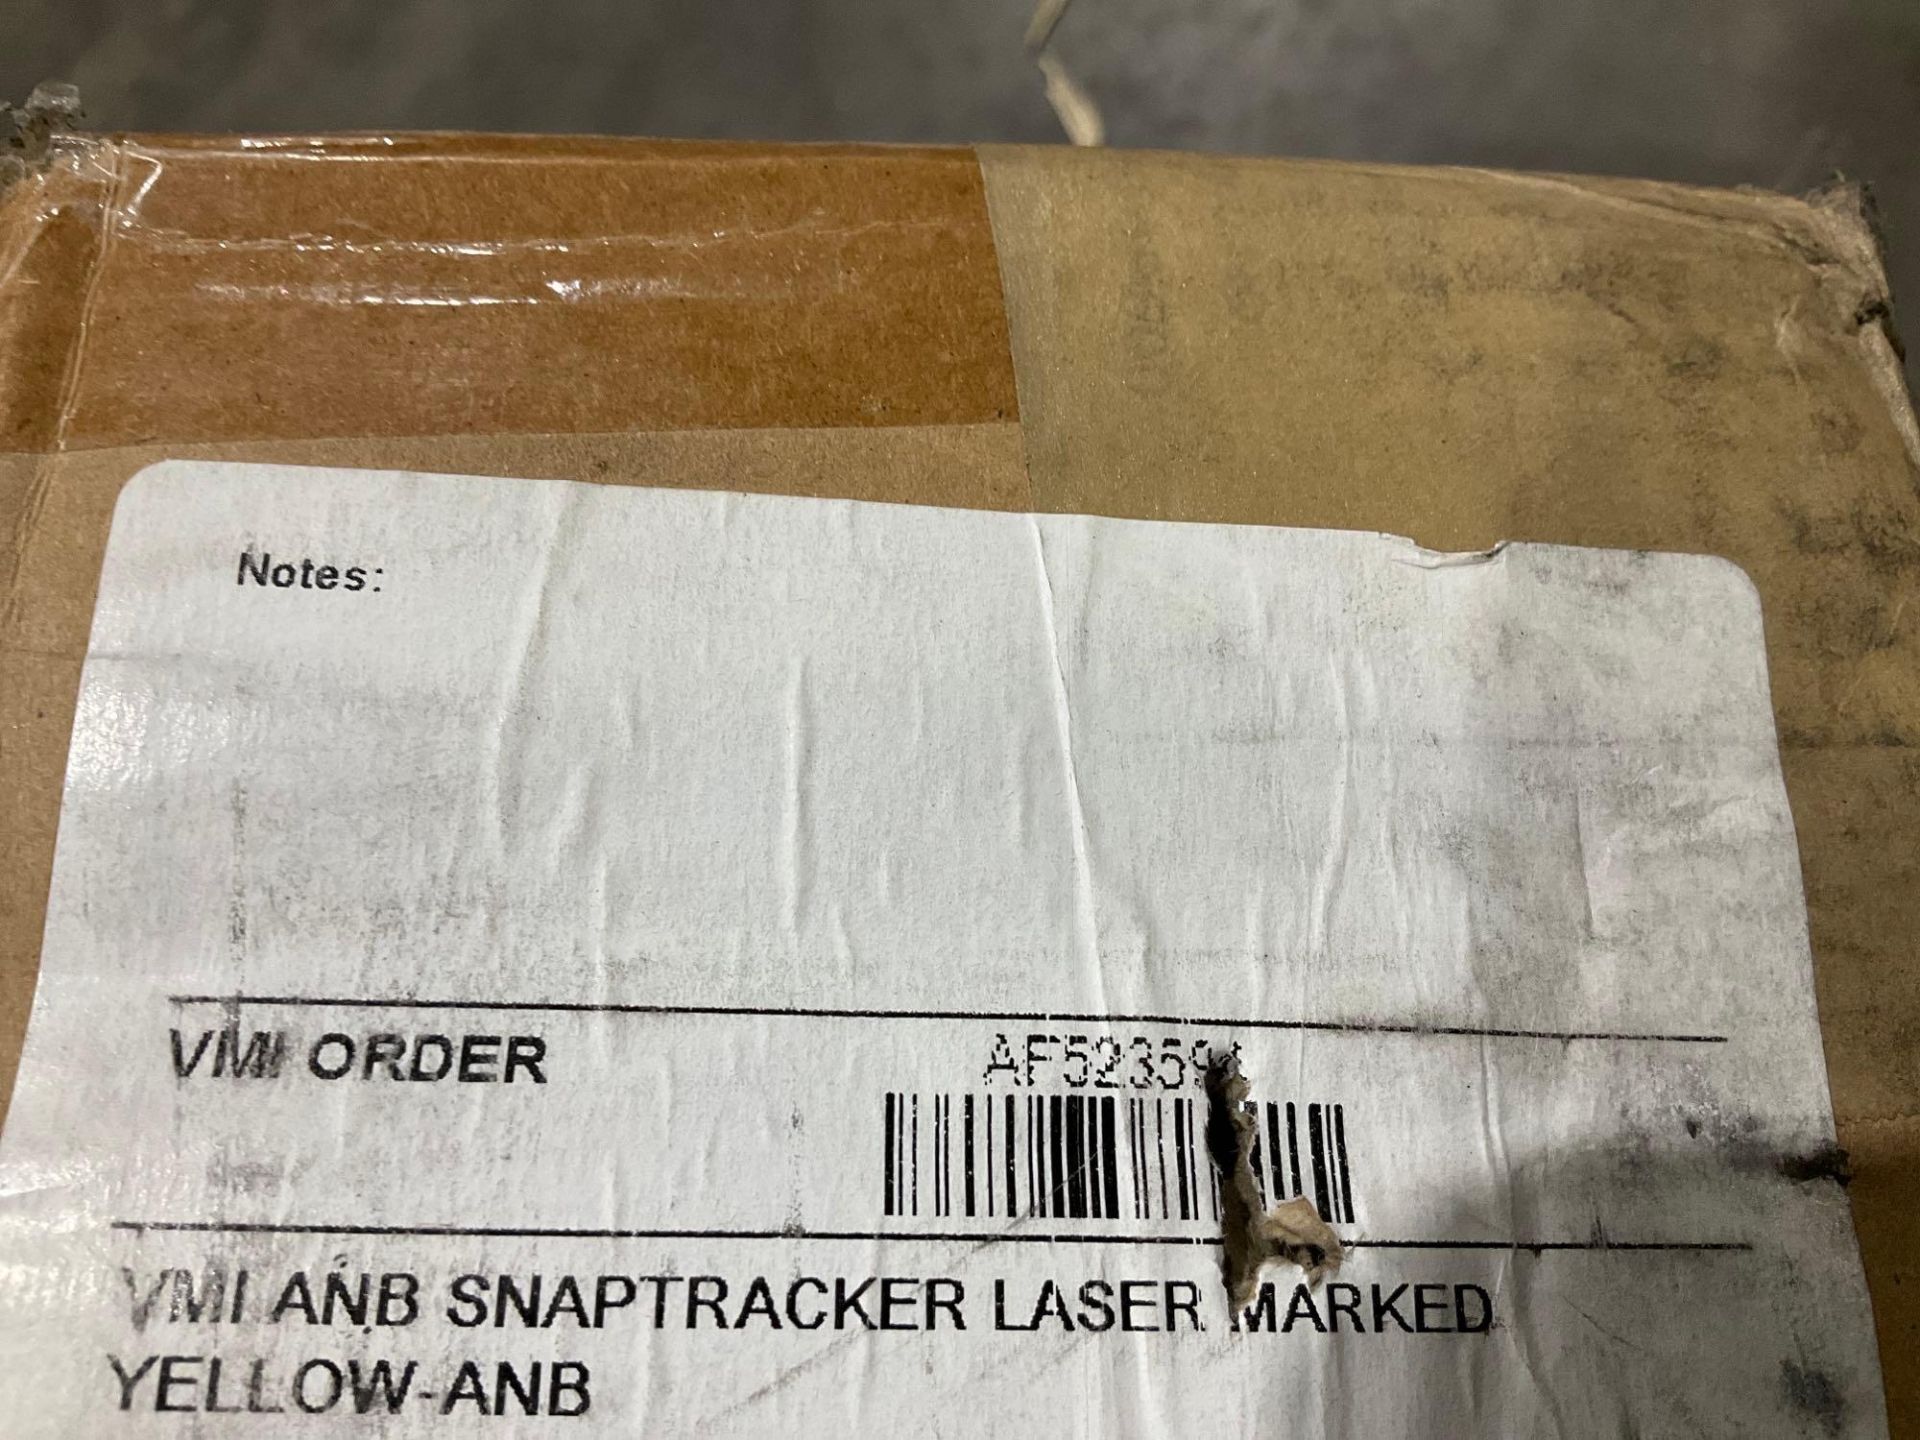 ABI SNAPTRACKER LASER MARKED YELLOW BOLT SEALS , APPROX 200 IN BOX - Image 3 of 4